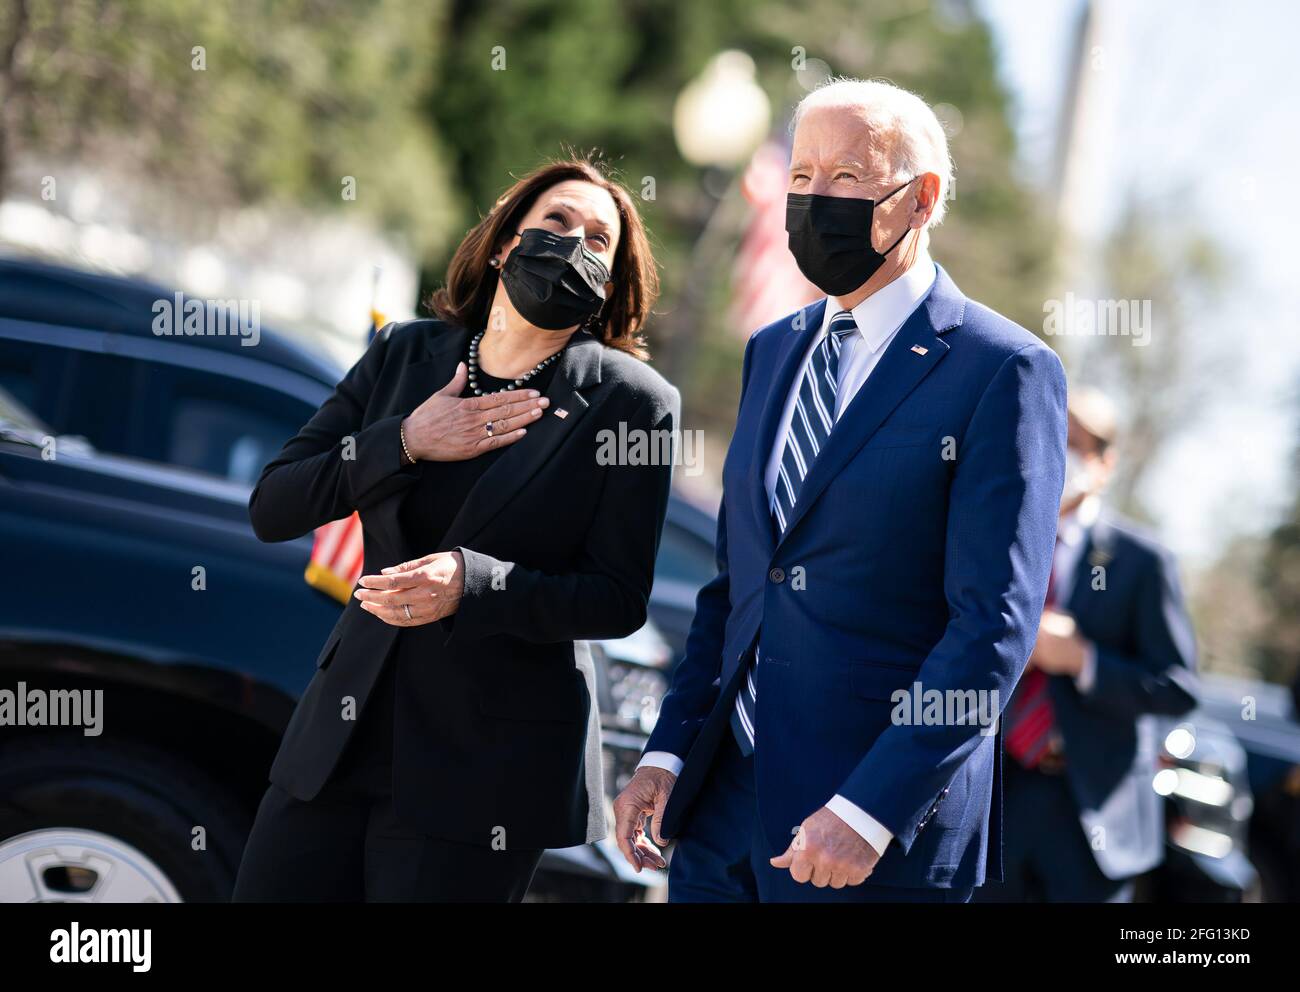 President Joe Biden walks with Vice President Kamala Harris across the West Executive Avenue at the White House Monday, March 29, 2021, following the President’s remarks in the South Court Auditorium in the Eisenhower Executive Office Building. (Official White House Photo by Lawrence Jackson) Stock Photo